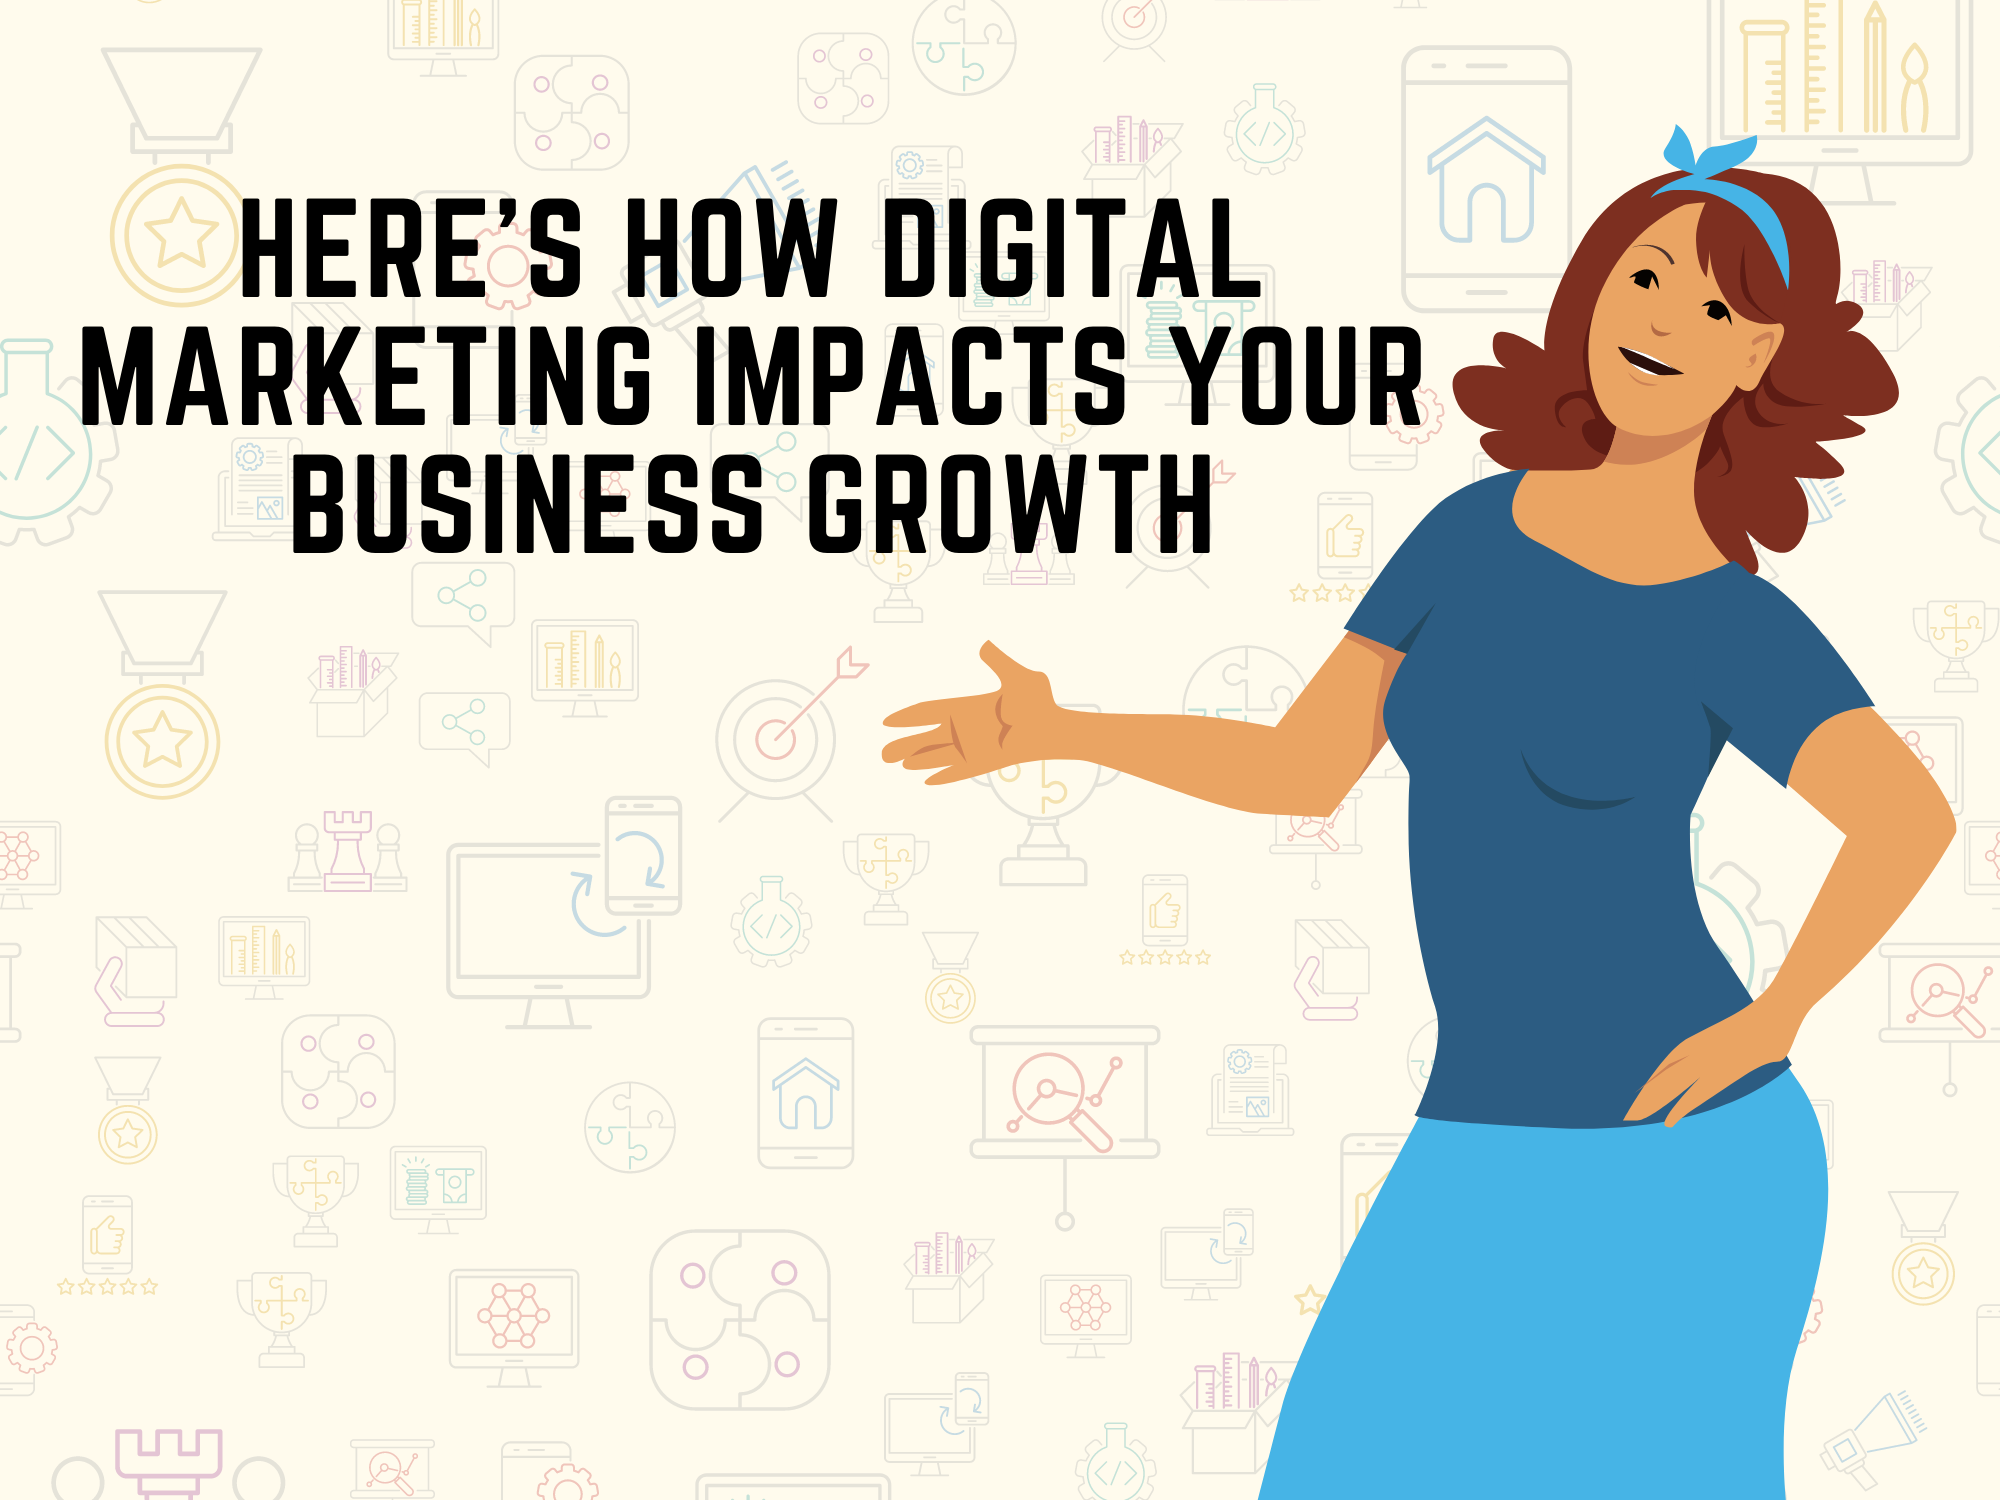 How Digital Marketing Impacts Your Business Growth